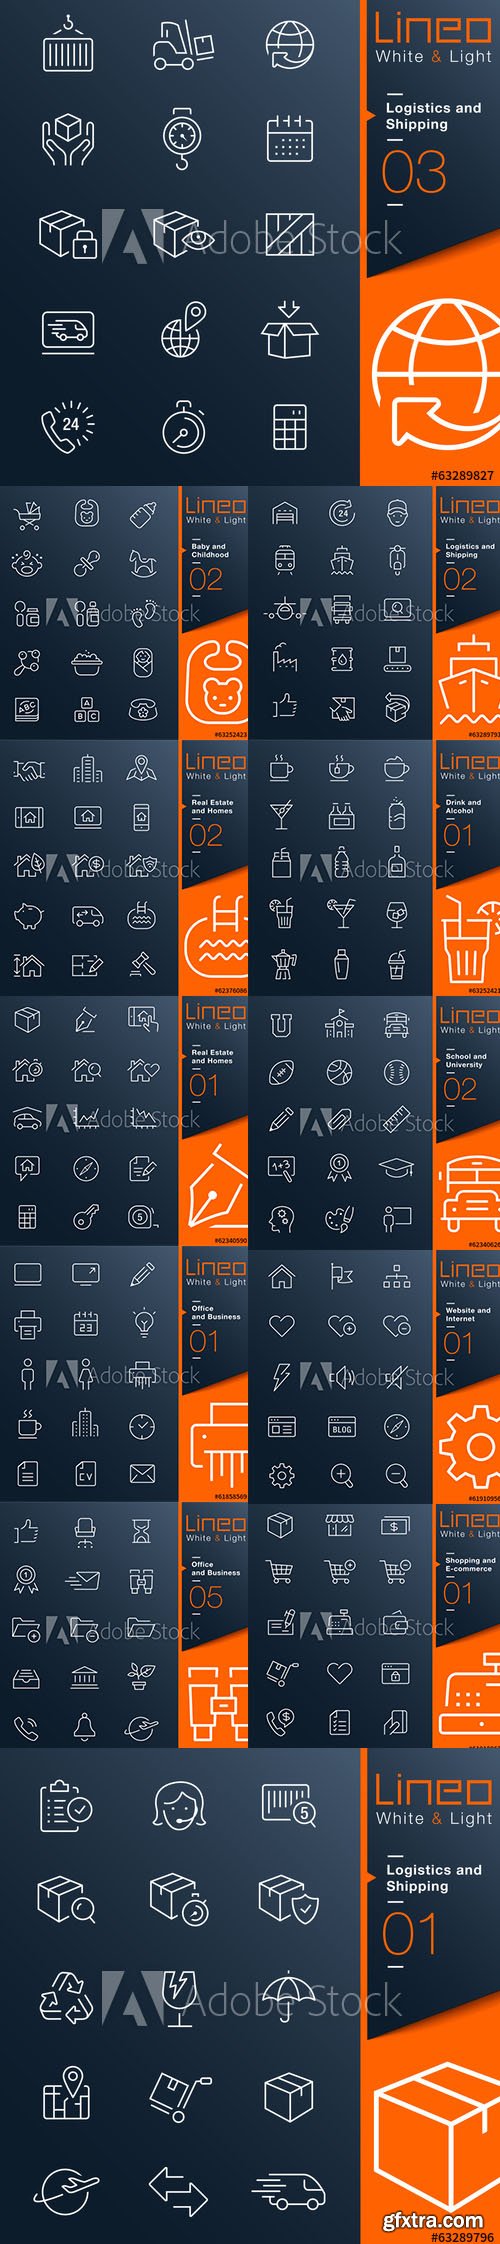 Vector Set - Lineo White and Light Outline Icons